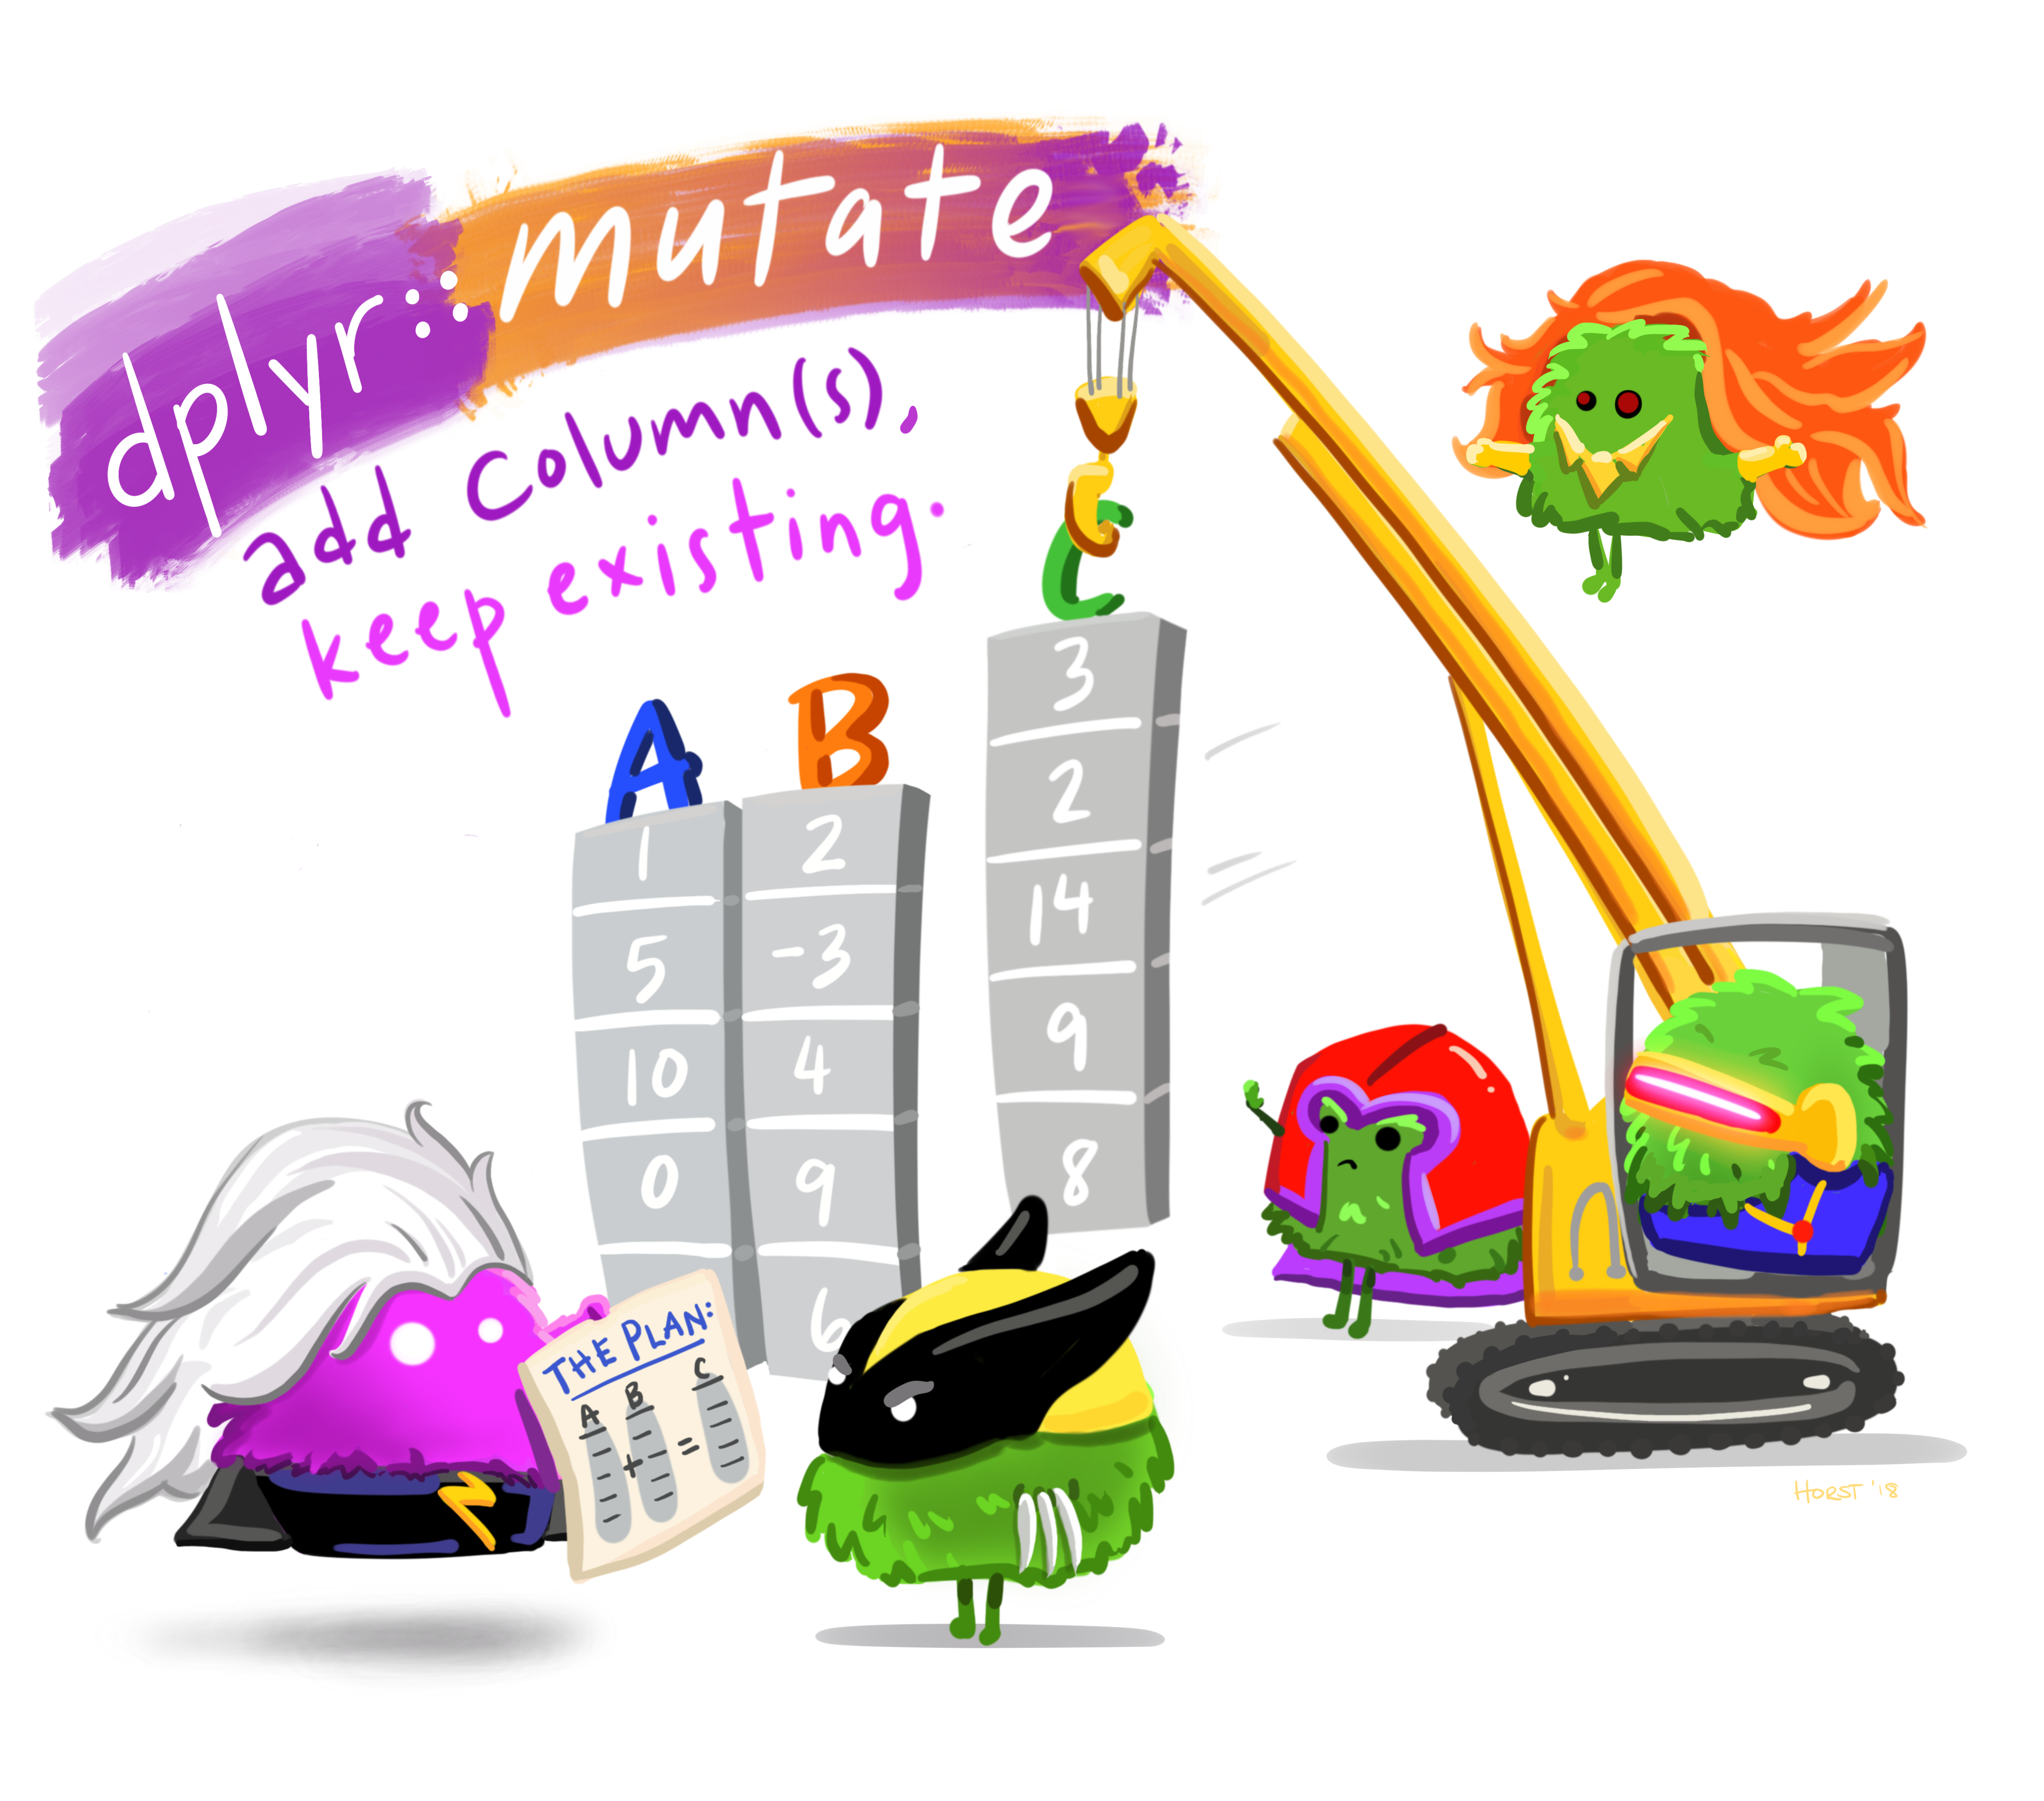 Cartoon of cute fuzzy monsters dressed up as different X-men characters, working together to add a new column to an existing data frame. Stylized title text reads “dplyr::mutate - add columns, keep existing.